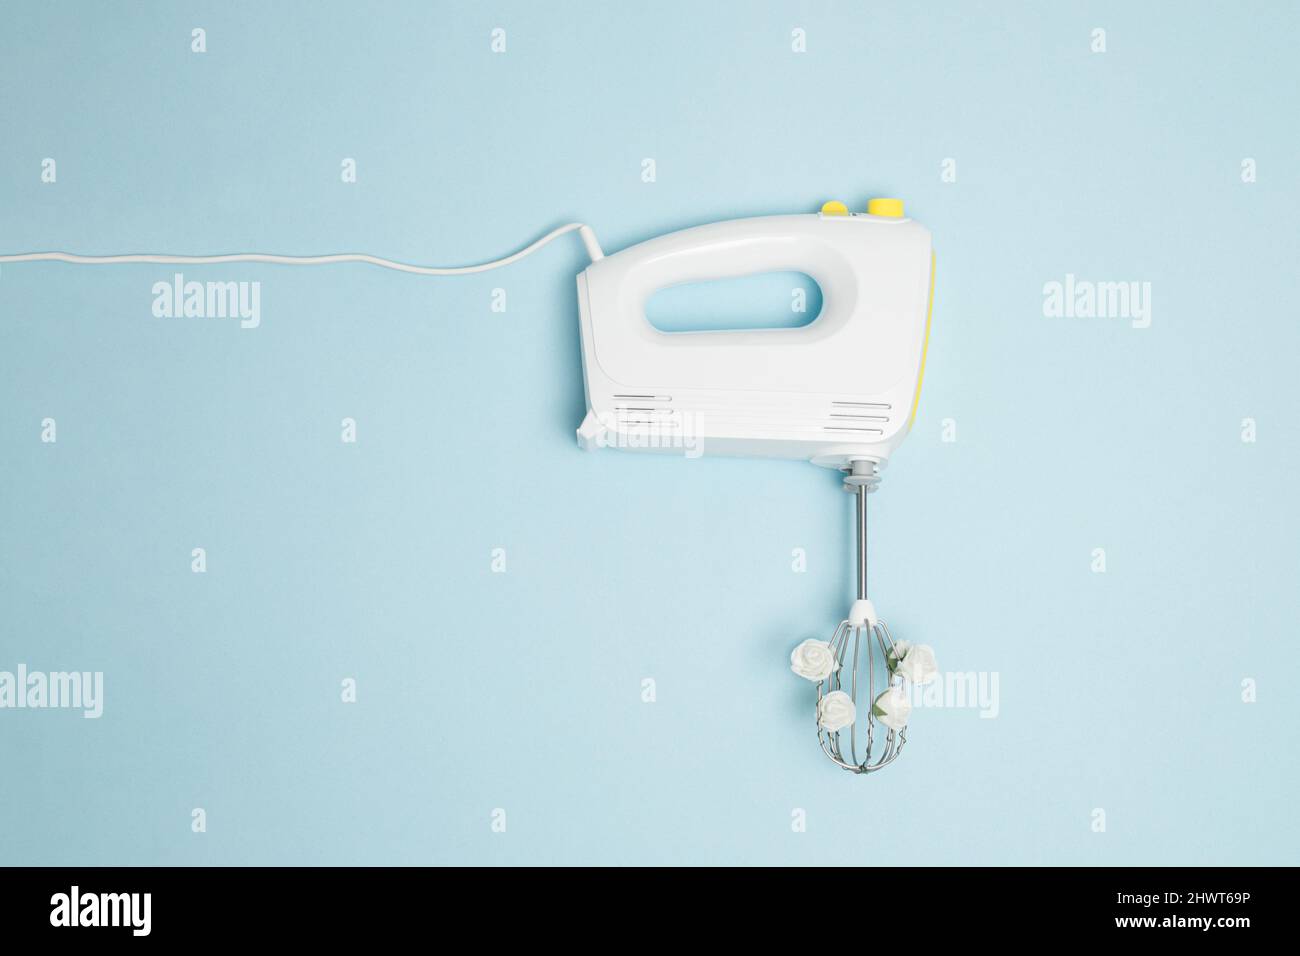 https://c8.alamy.com/comp/2HWT69P/creative-concept-made-of-white-electric-hand-mixer-with-beaters-and-white-rose-flowers-on-pastel-blue-background-household-kitchen-device-appliance-f-2HWT69P.jpg